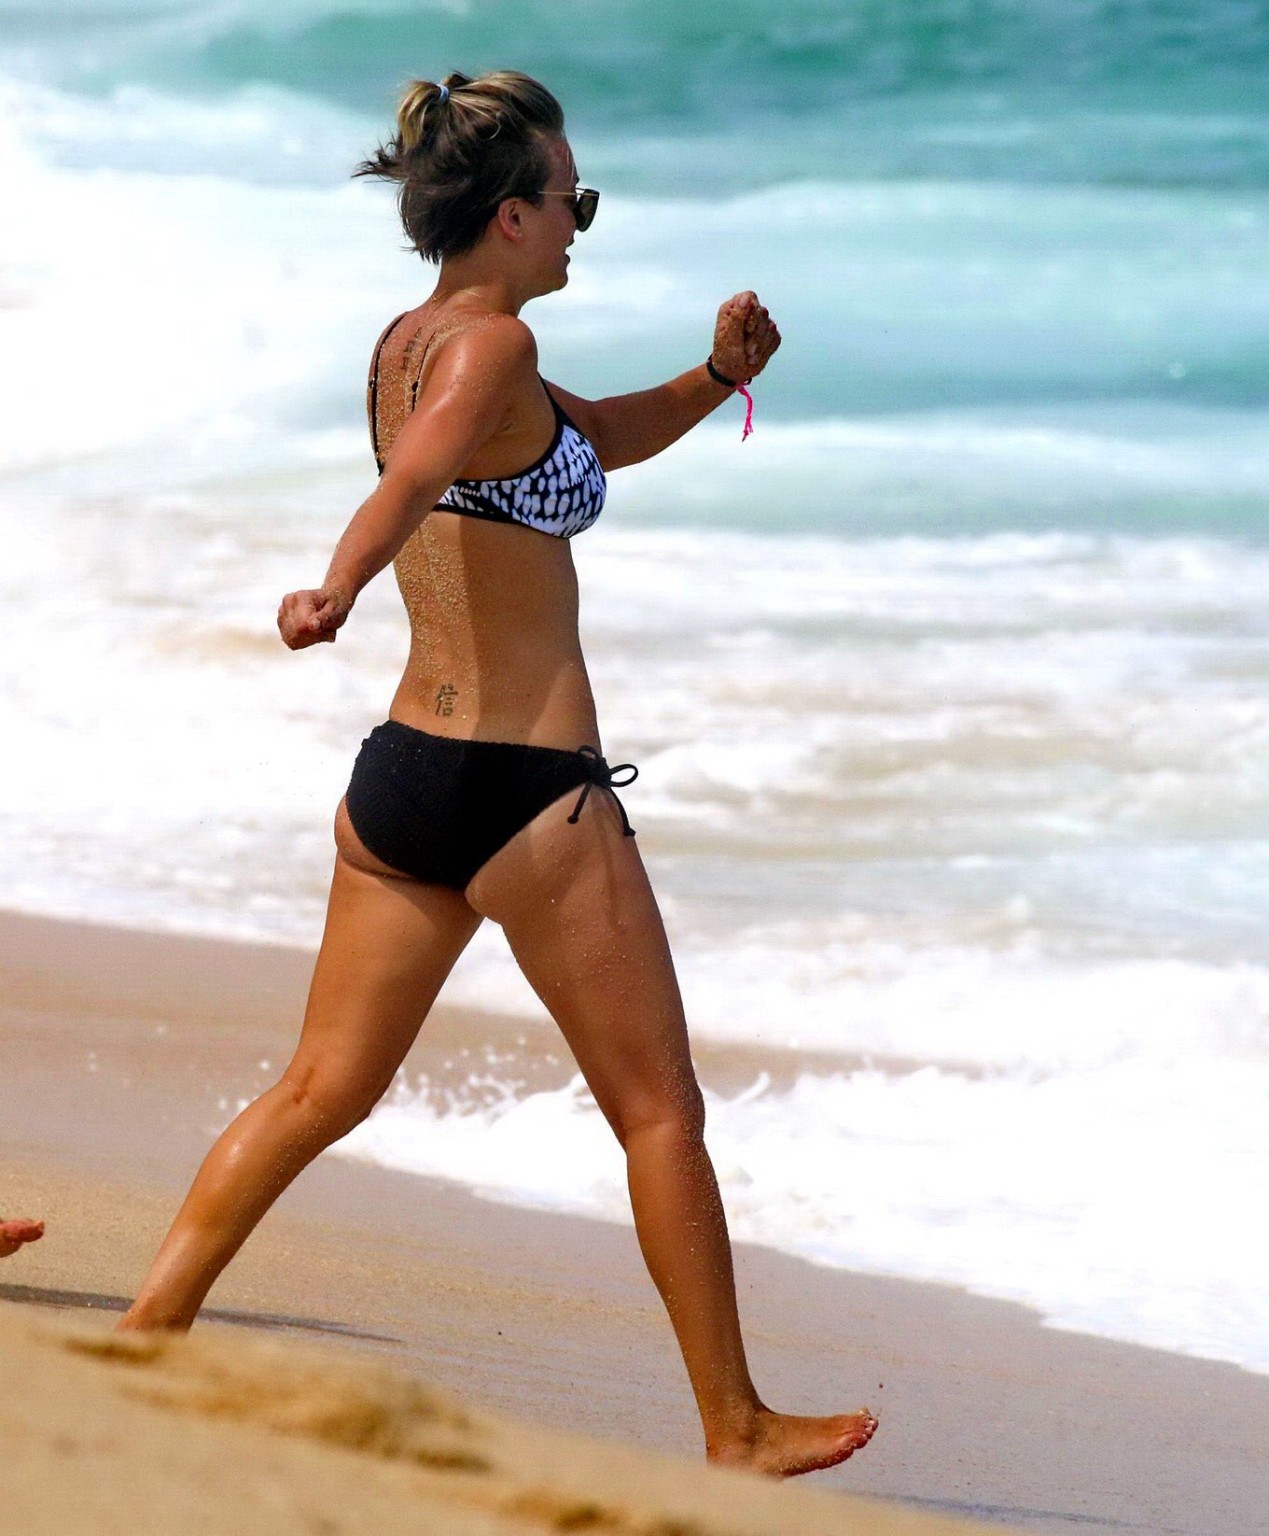 Kaley Cuoco shows off her ass wearing a monochrome bikini on a beach in Mexico #75191862